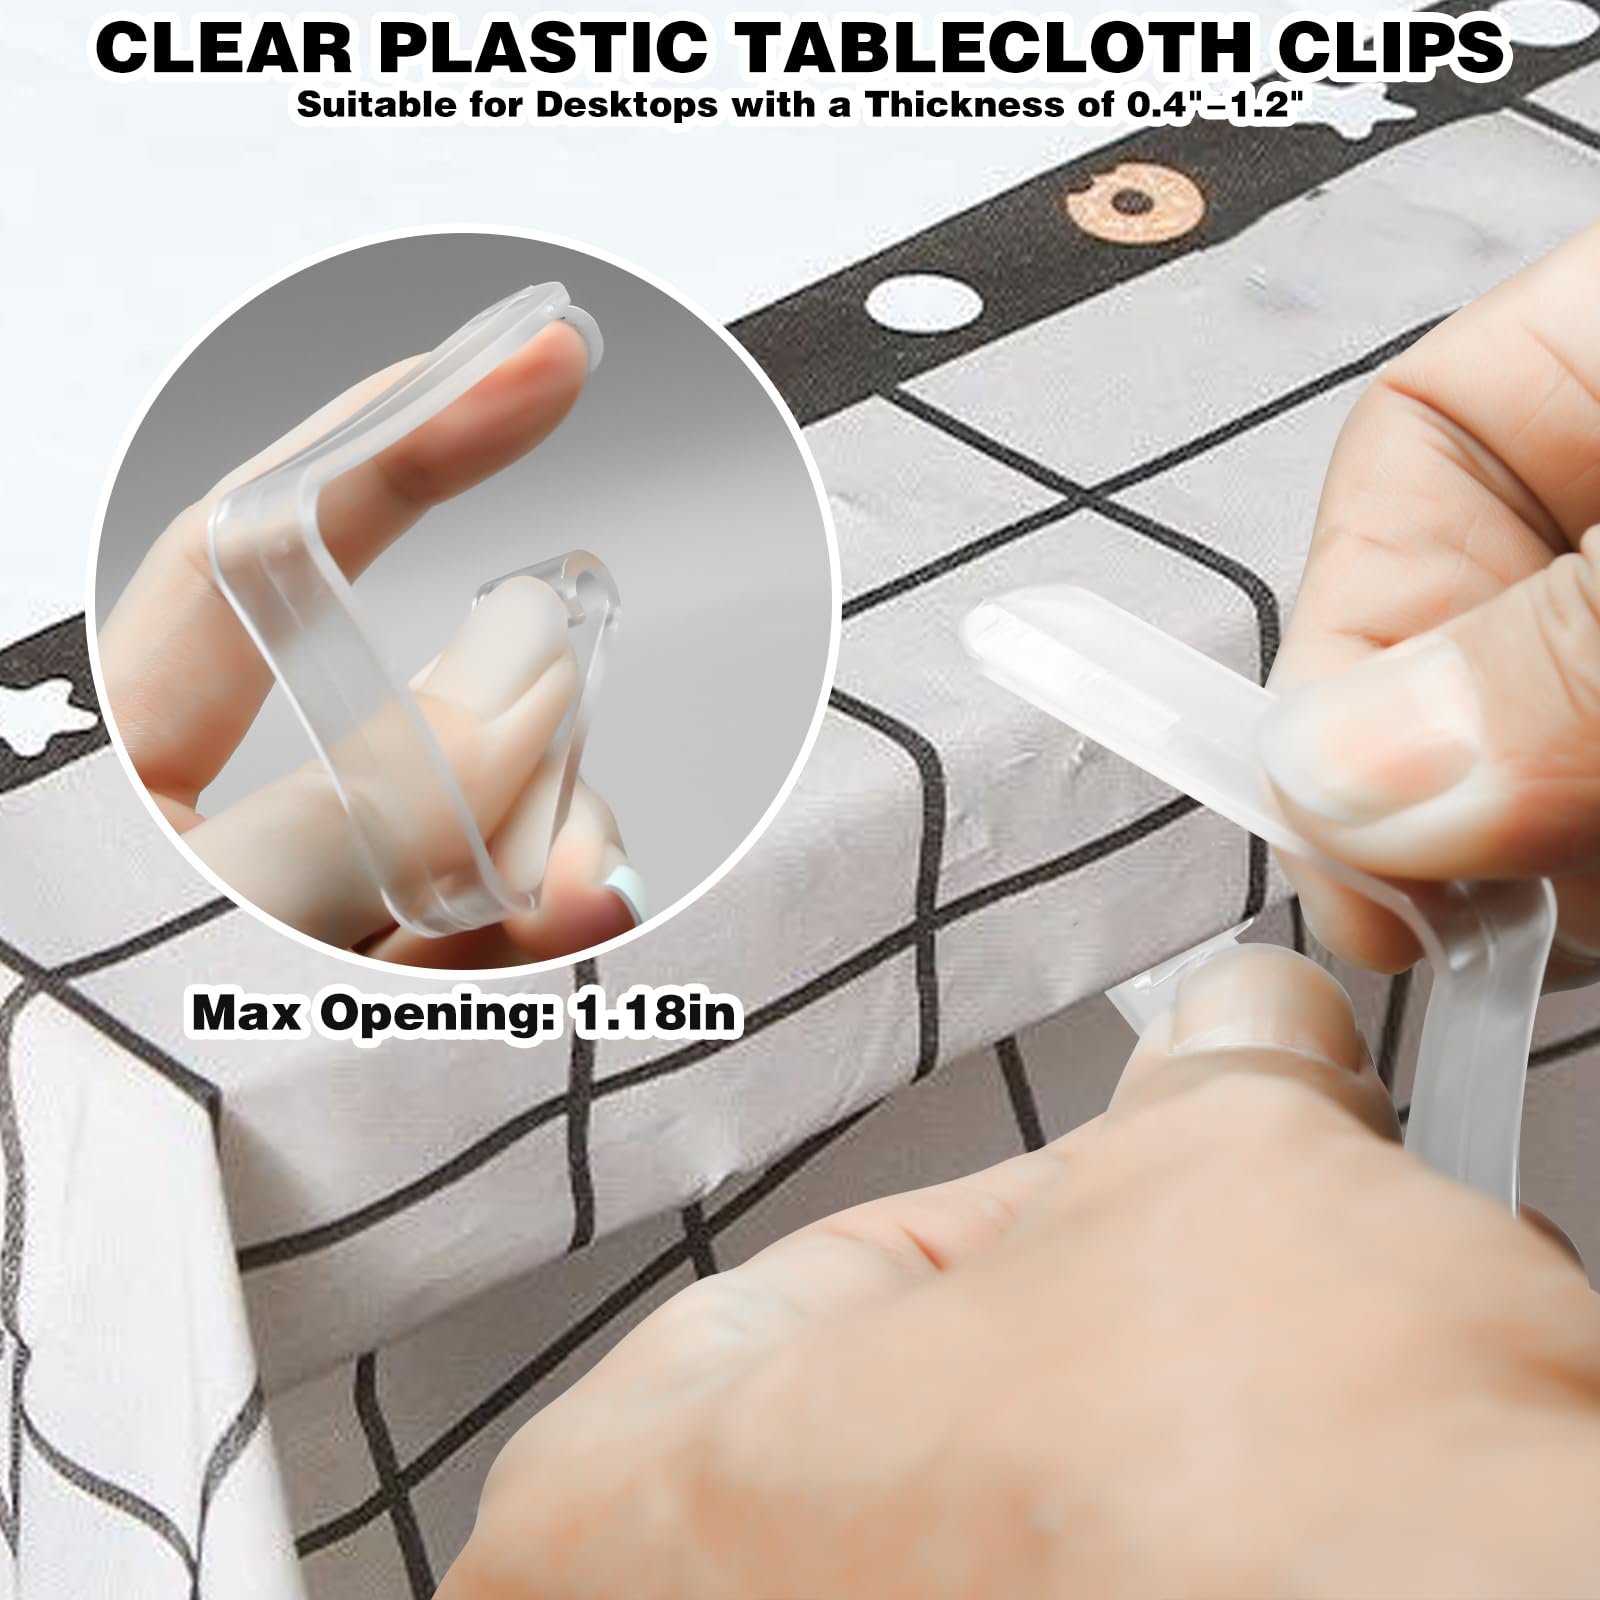 48 Pcs Table Cloth Holder Clips Plastic Tablecloth Clips for Outdoor Picnic Tables, Clear Picnic Table Clips for Tablecloth, Table Skirt Clip Table Cover Clips to Hold Down Tablecloth for Party Events